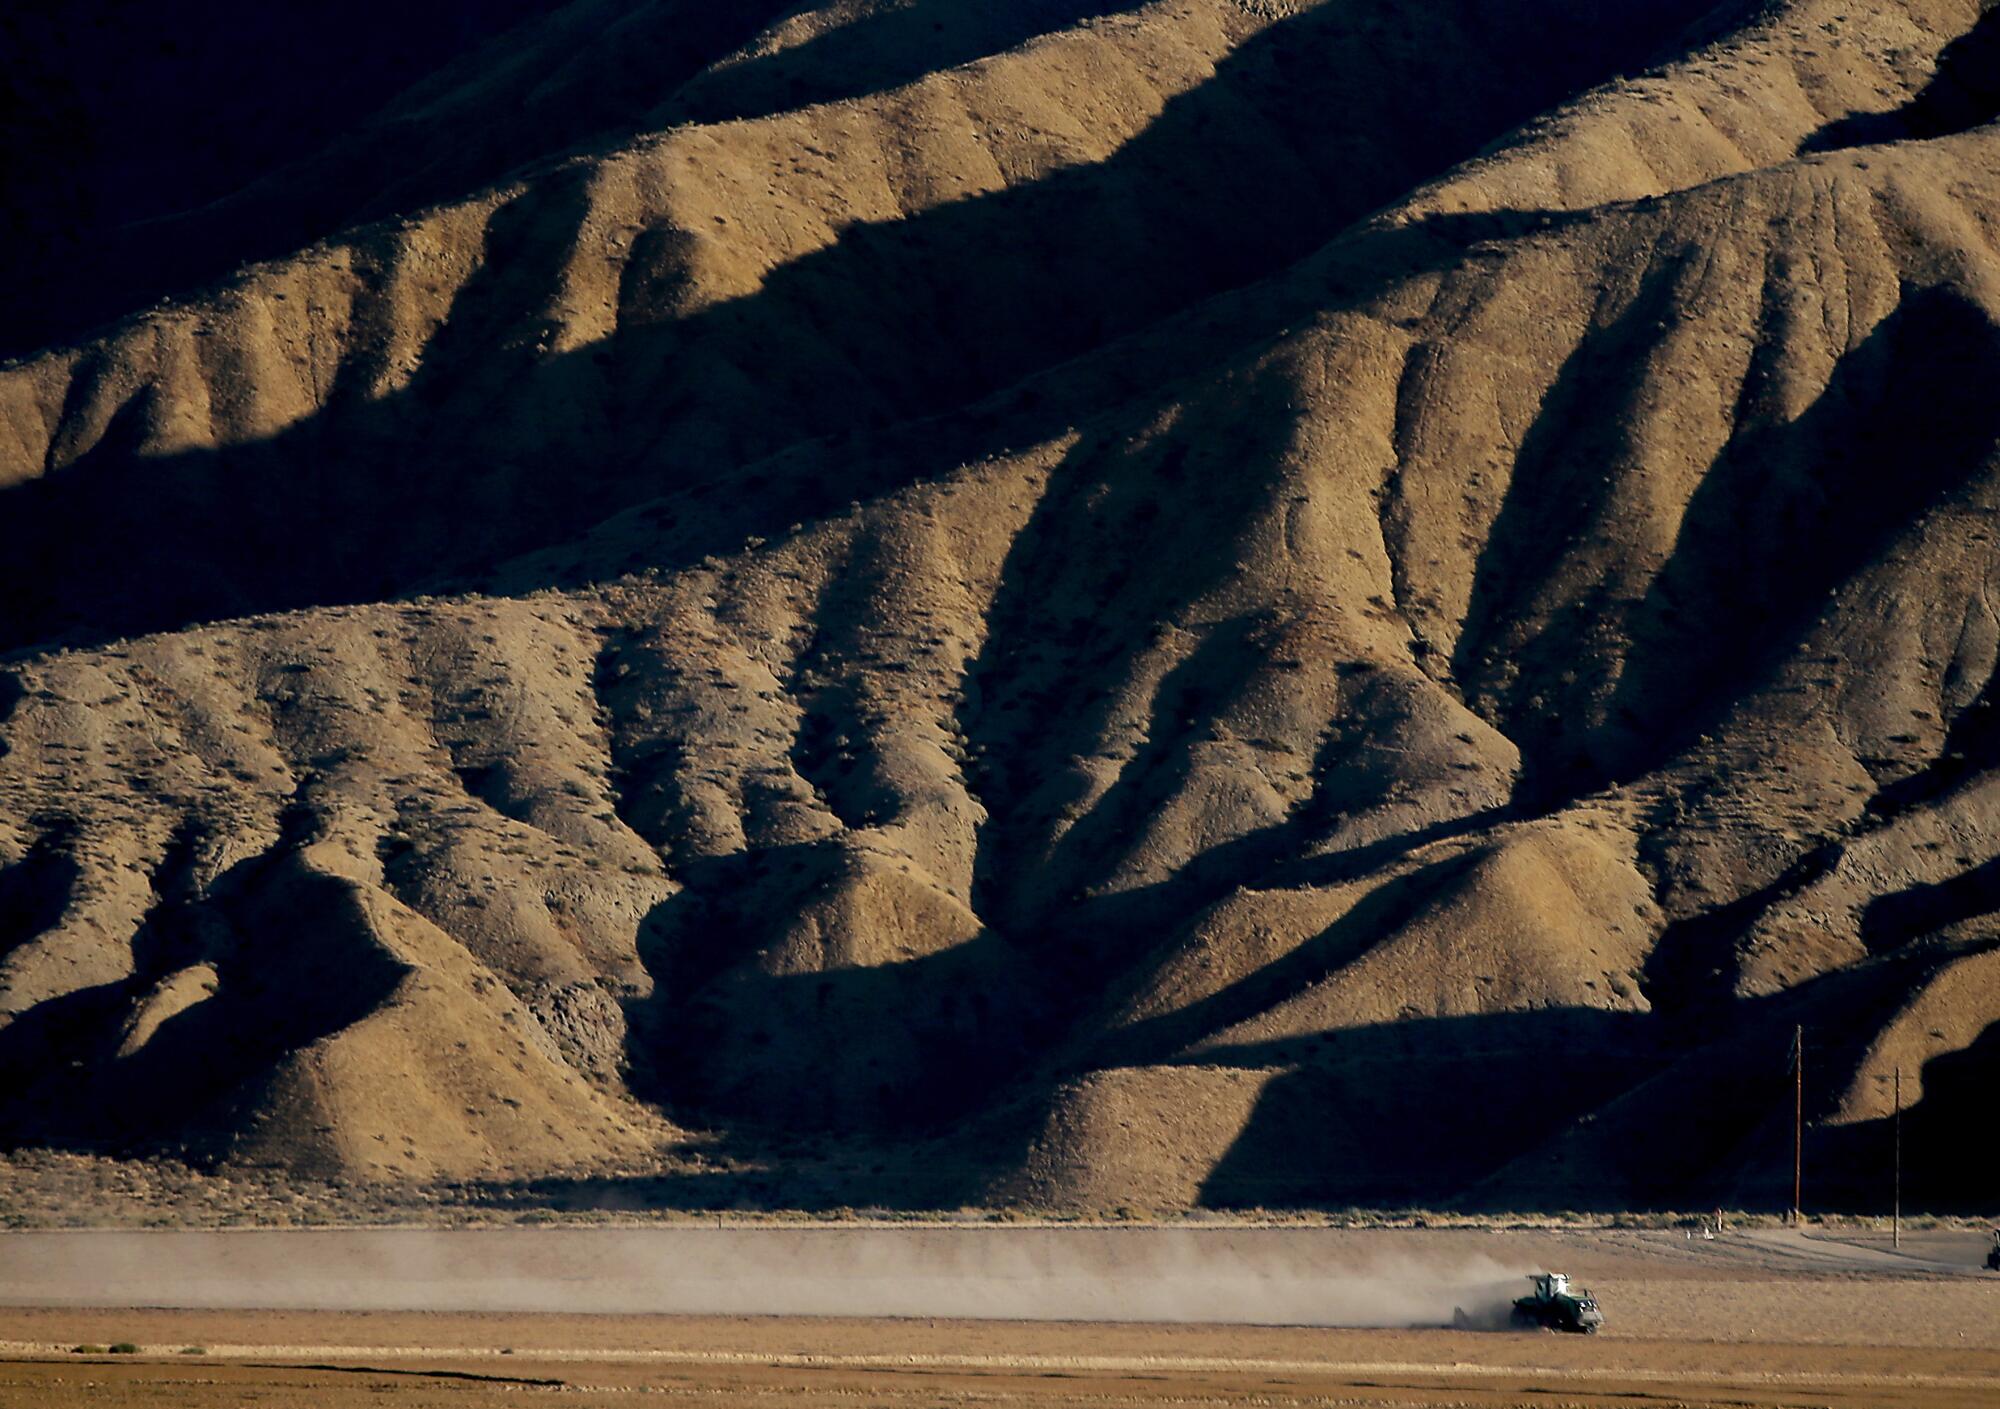 A tractor plows a field in the Cuyama Valley in October.